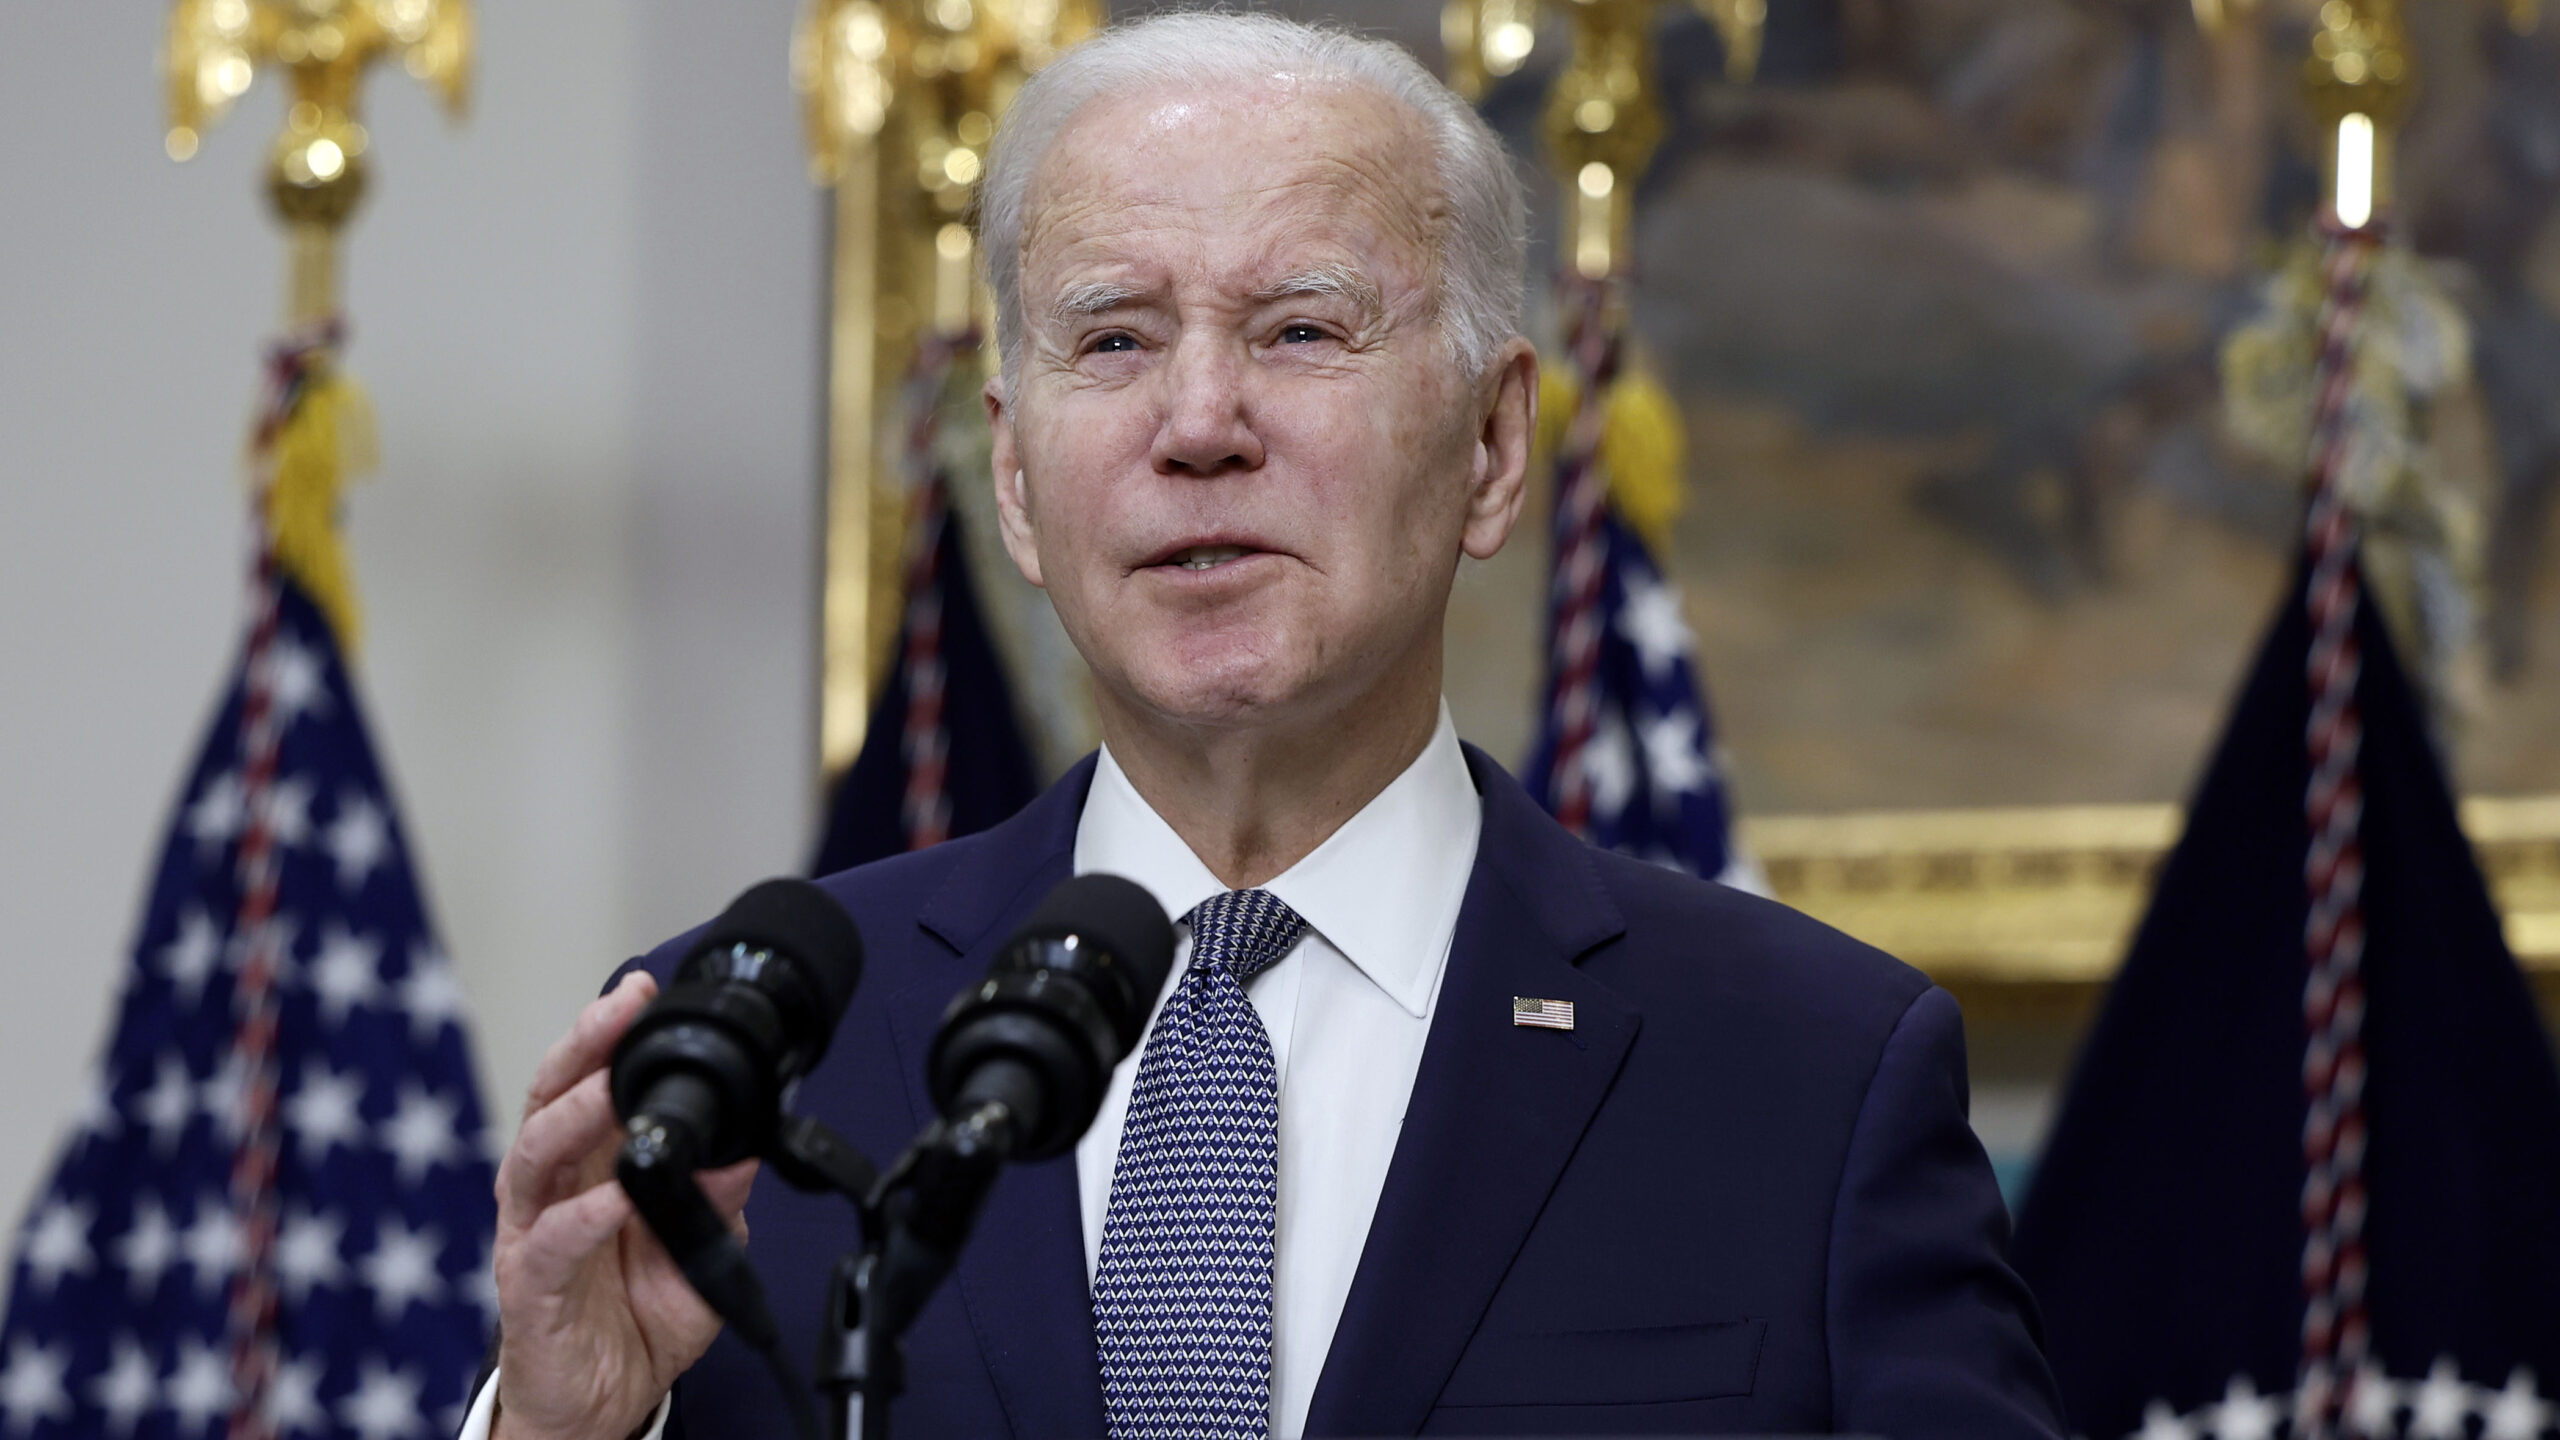 Biden Claims His ‘Quick Action’ Saved Banking Industry, Blames Trump For Banks Collapsing